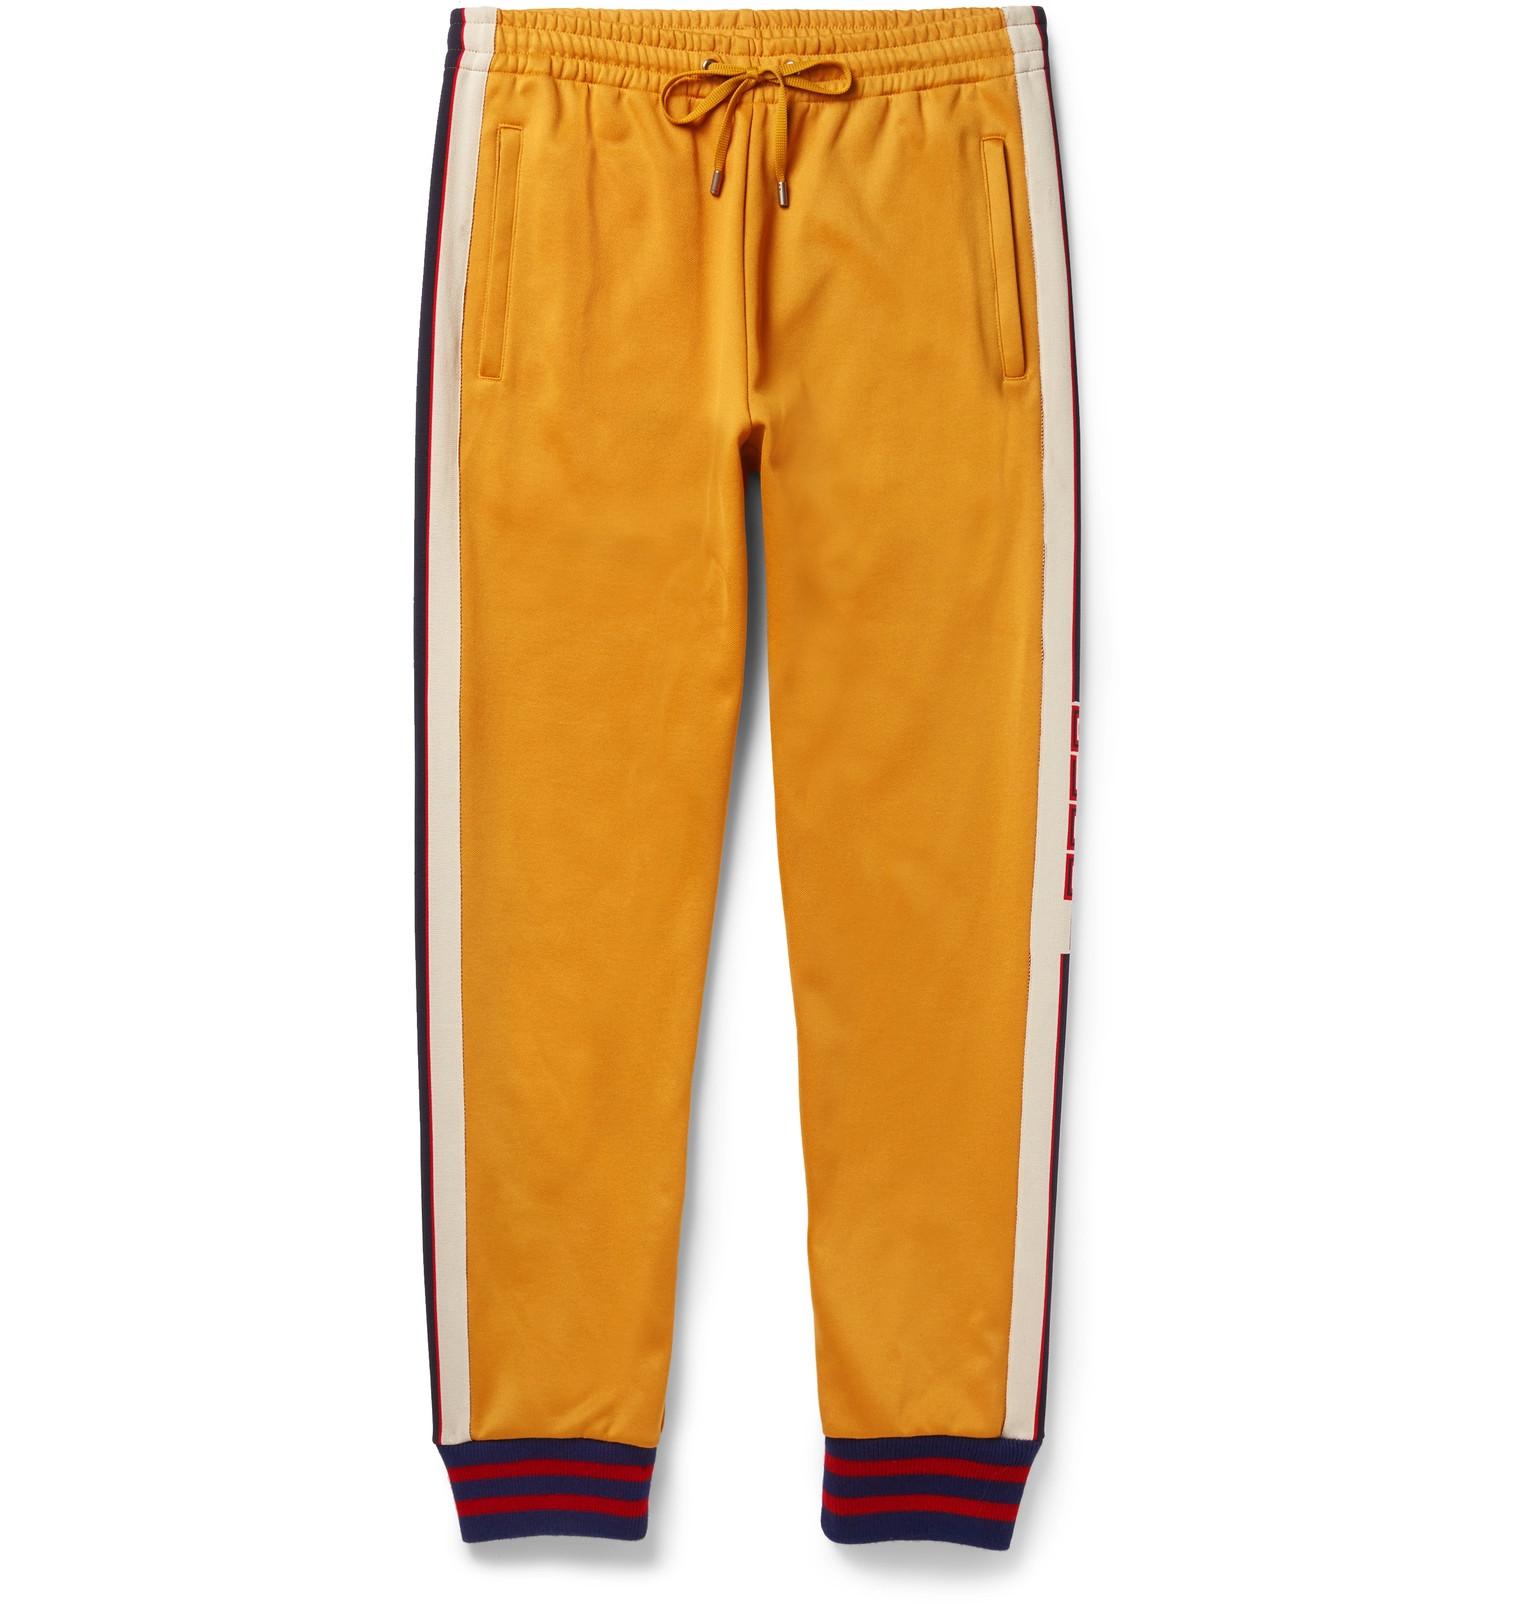 Lyst - Gucci Striped Jersey Sweatpants in Yellow for Men